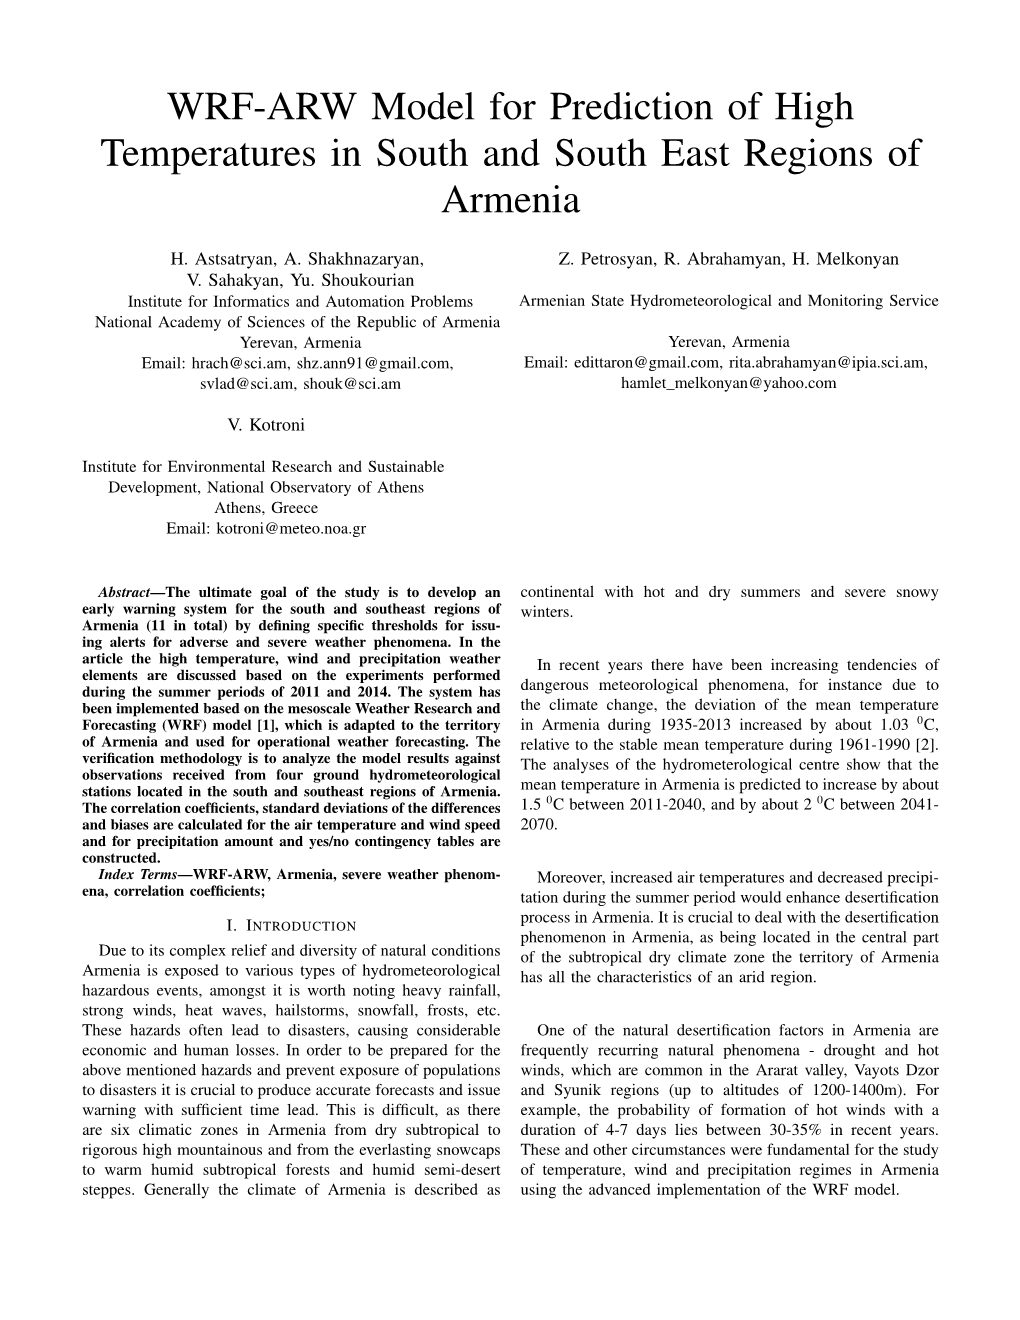 WRF-ARW Model for Prediction of High Temperatures in South and South East Regions of Armenia